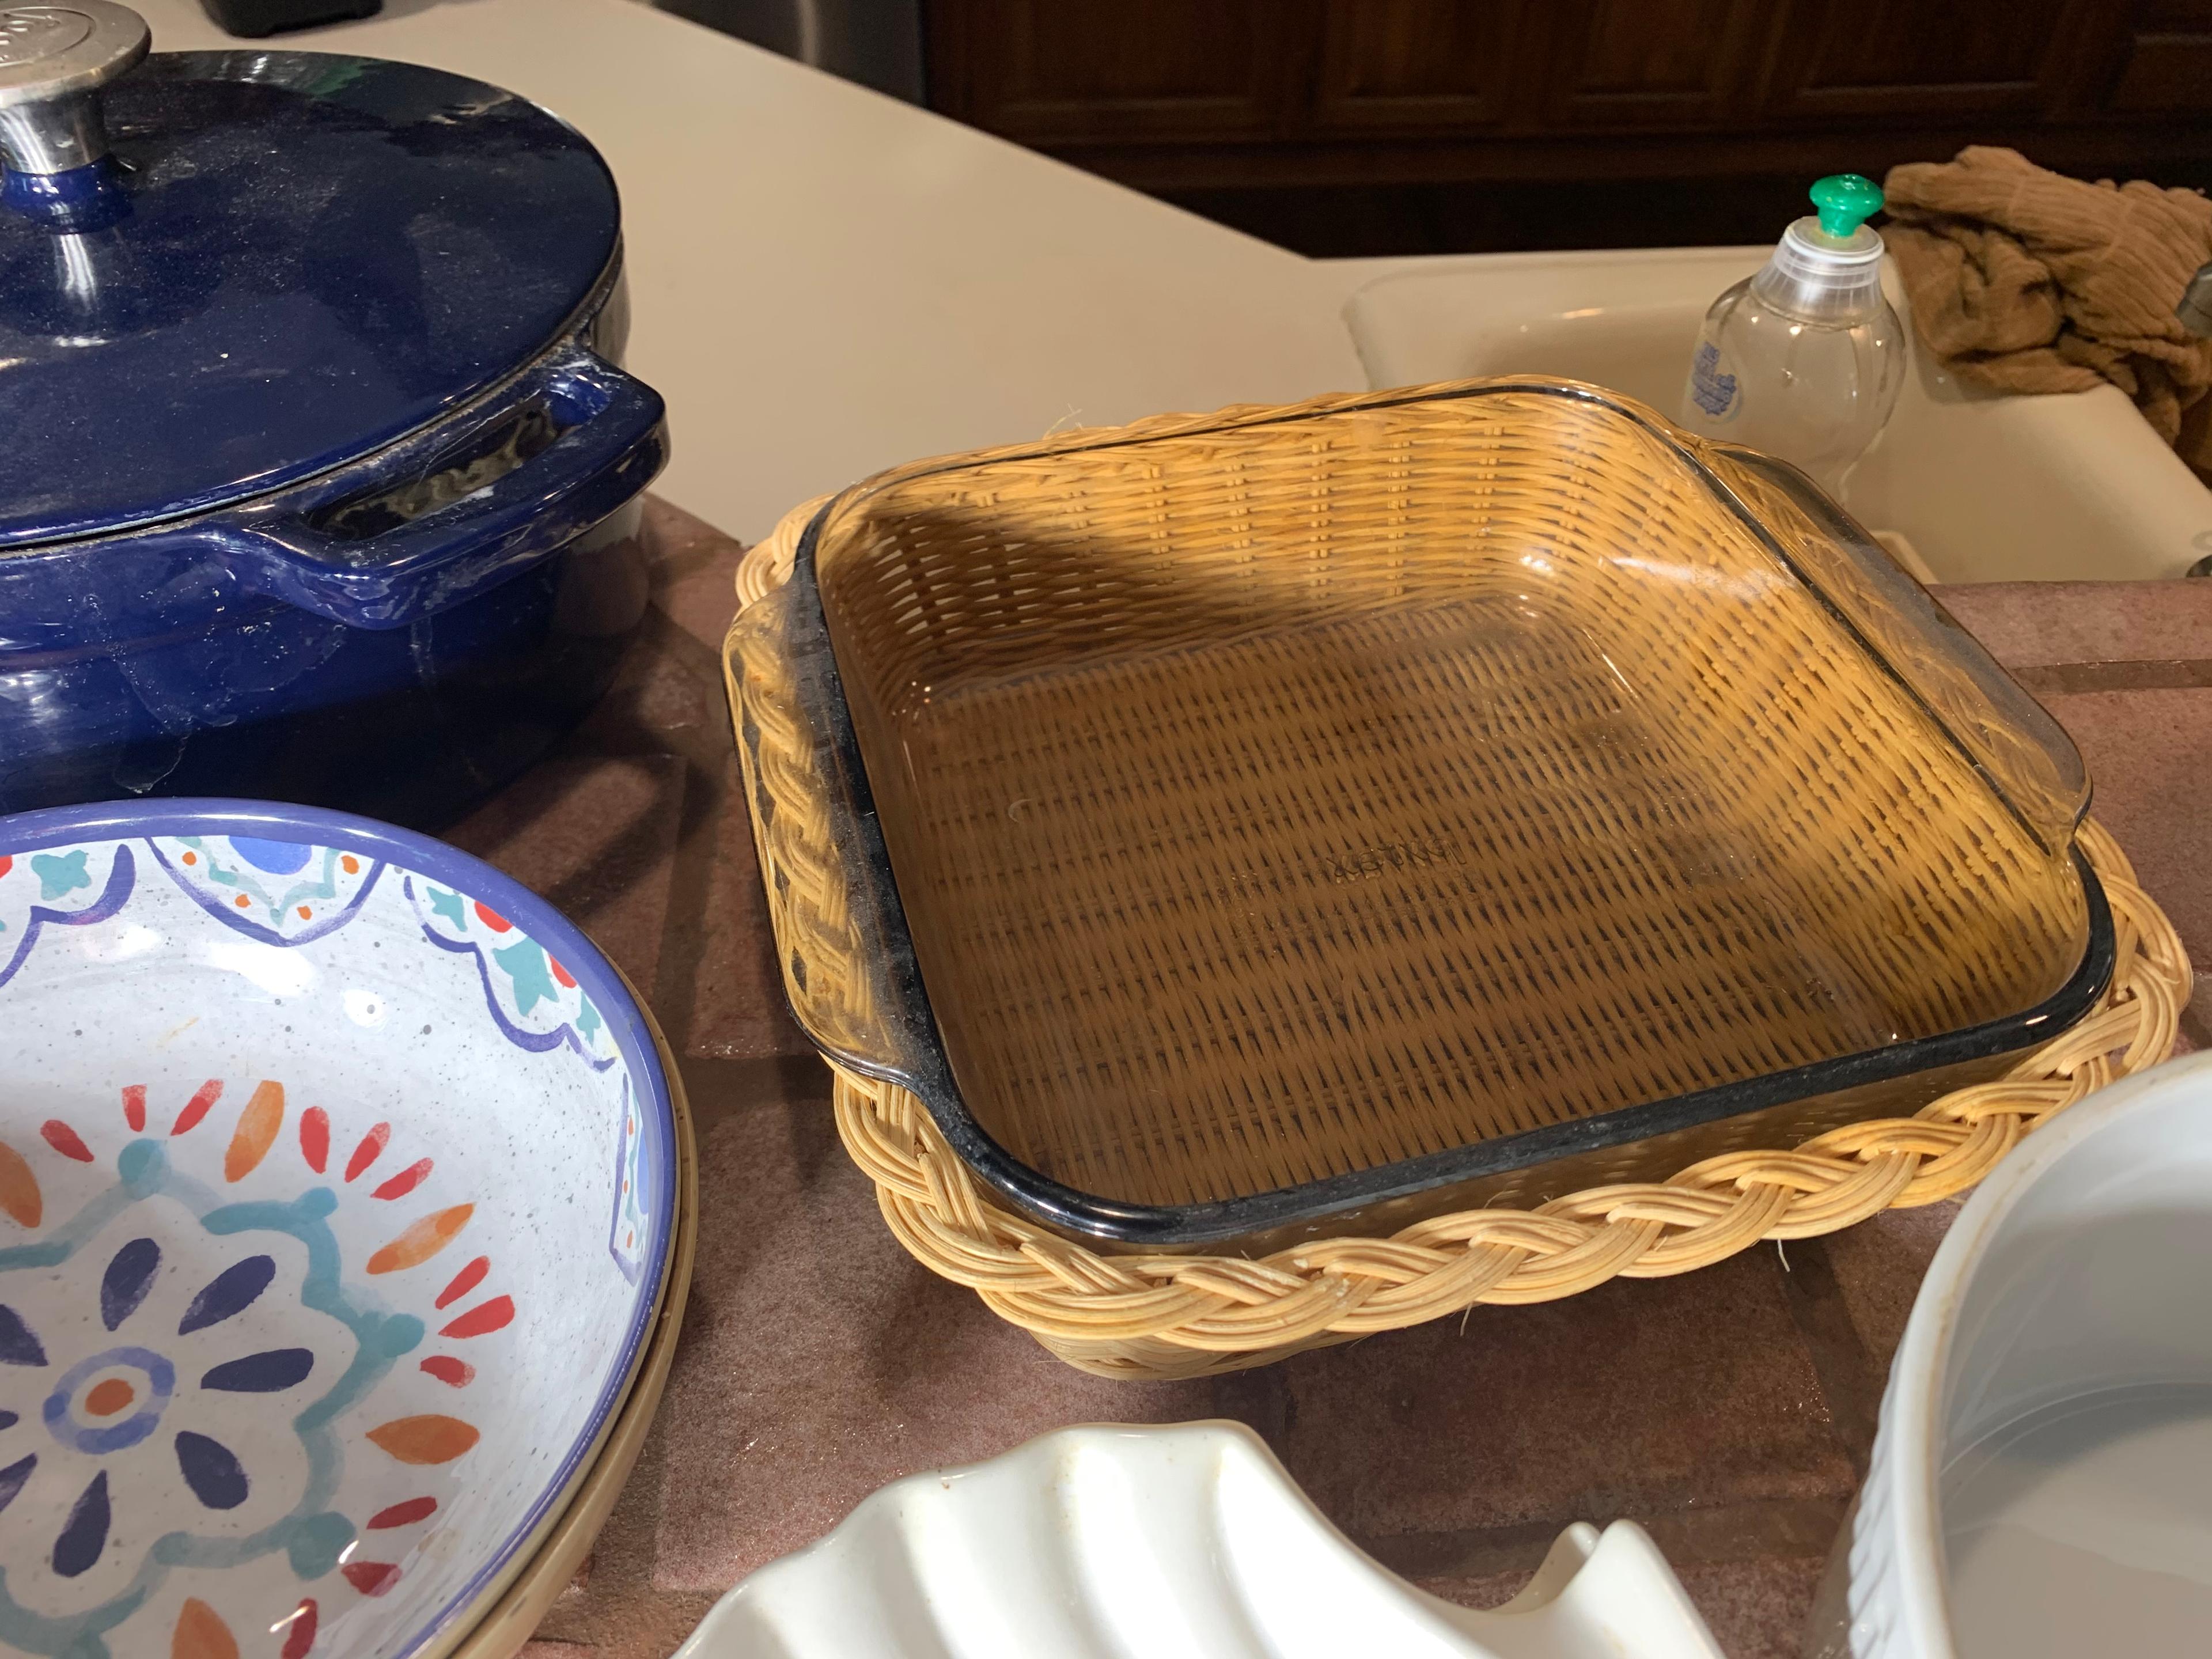 Group lot of blue dishes, utensils etc